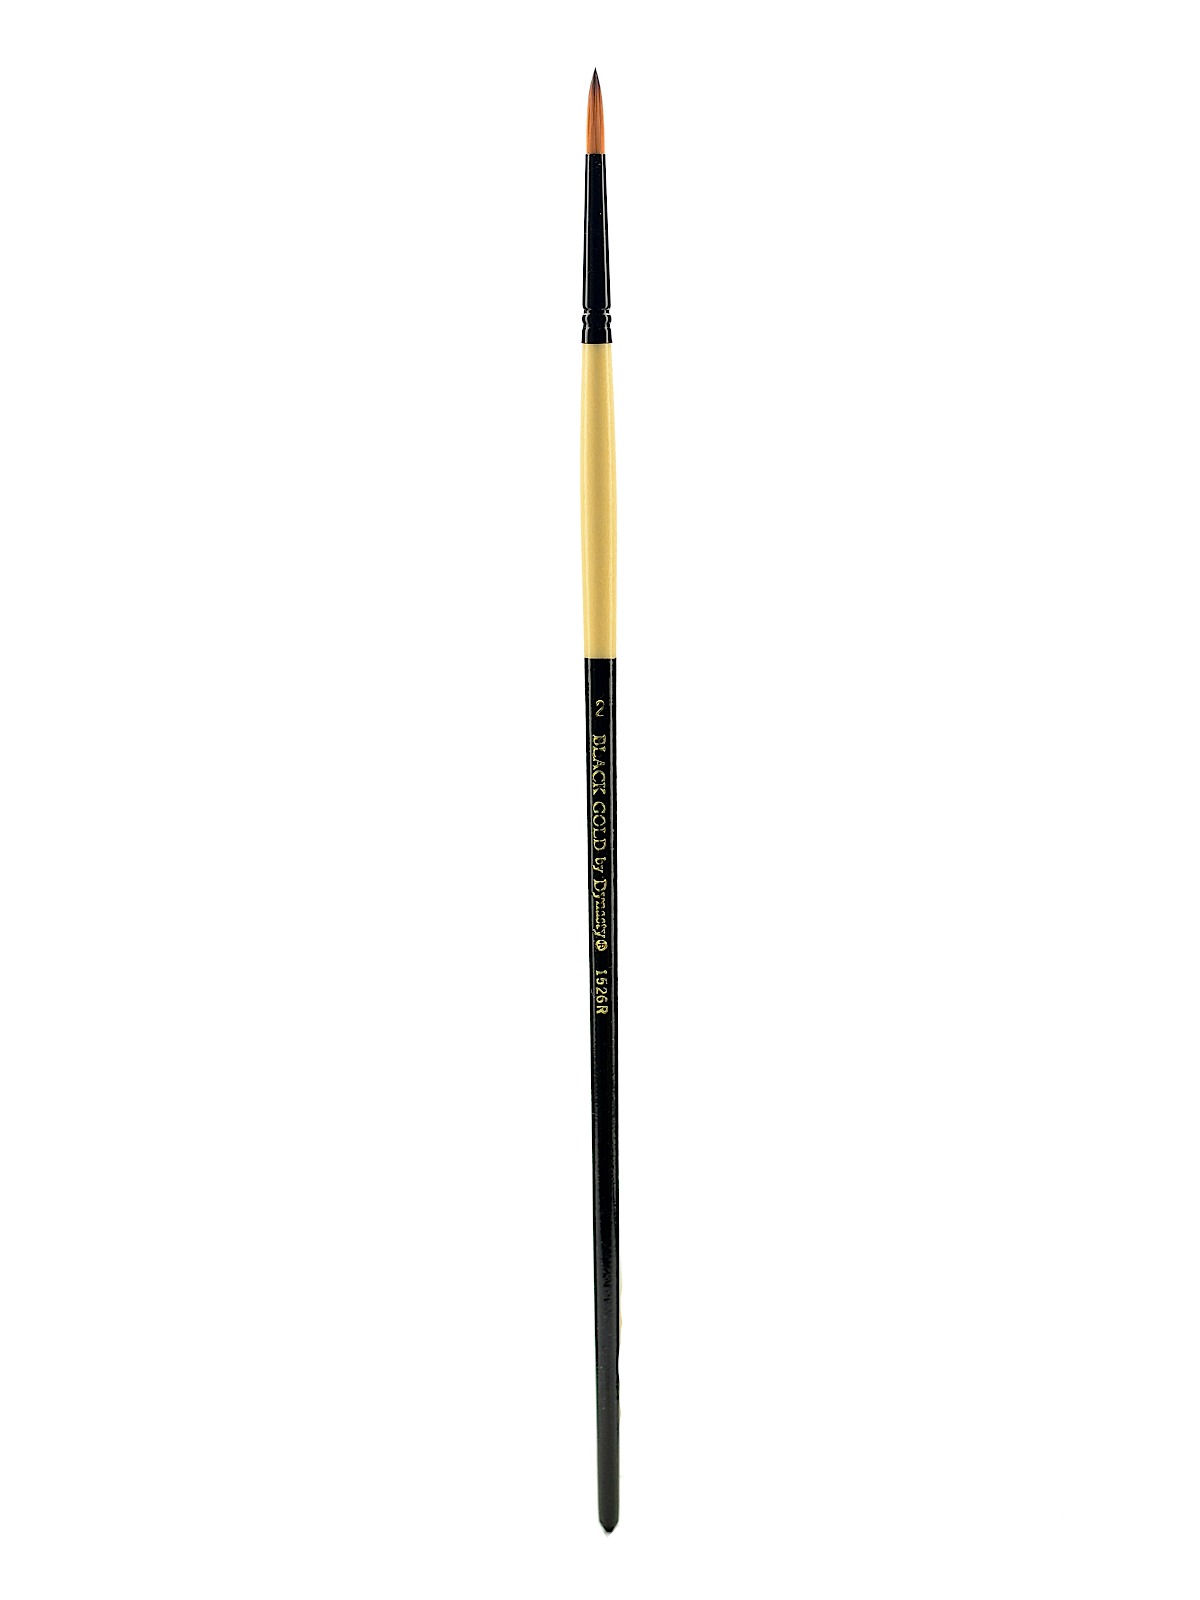 Black Gold Series Long Handled Synthetic Brushes 2 Round 1526r